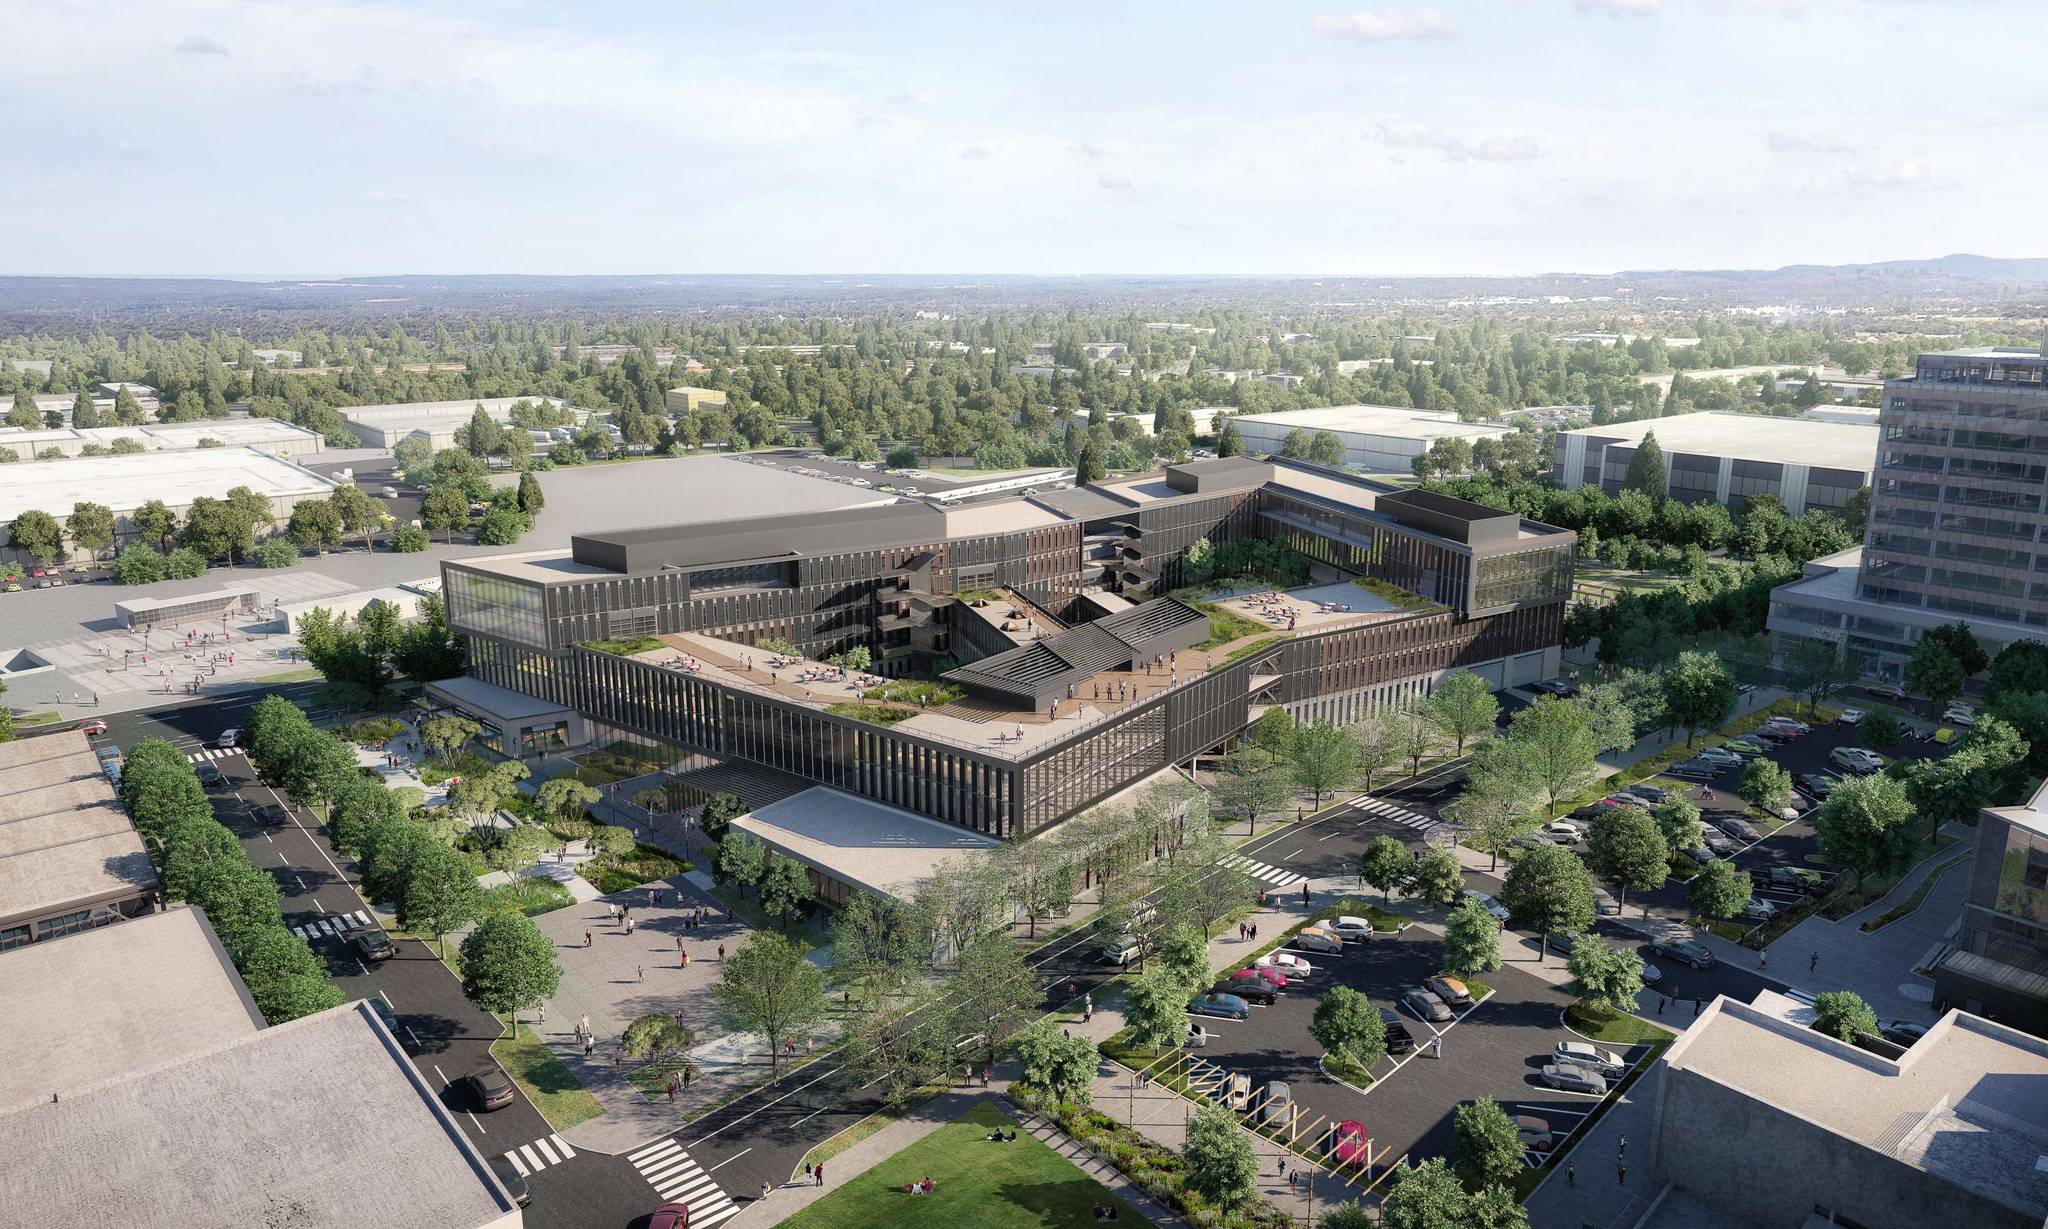 REI submits headquarters design in Bellevue for review